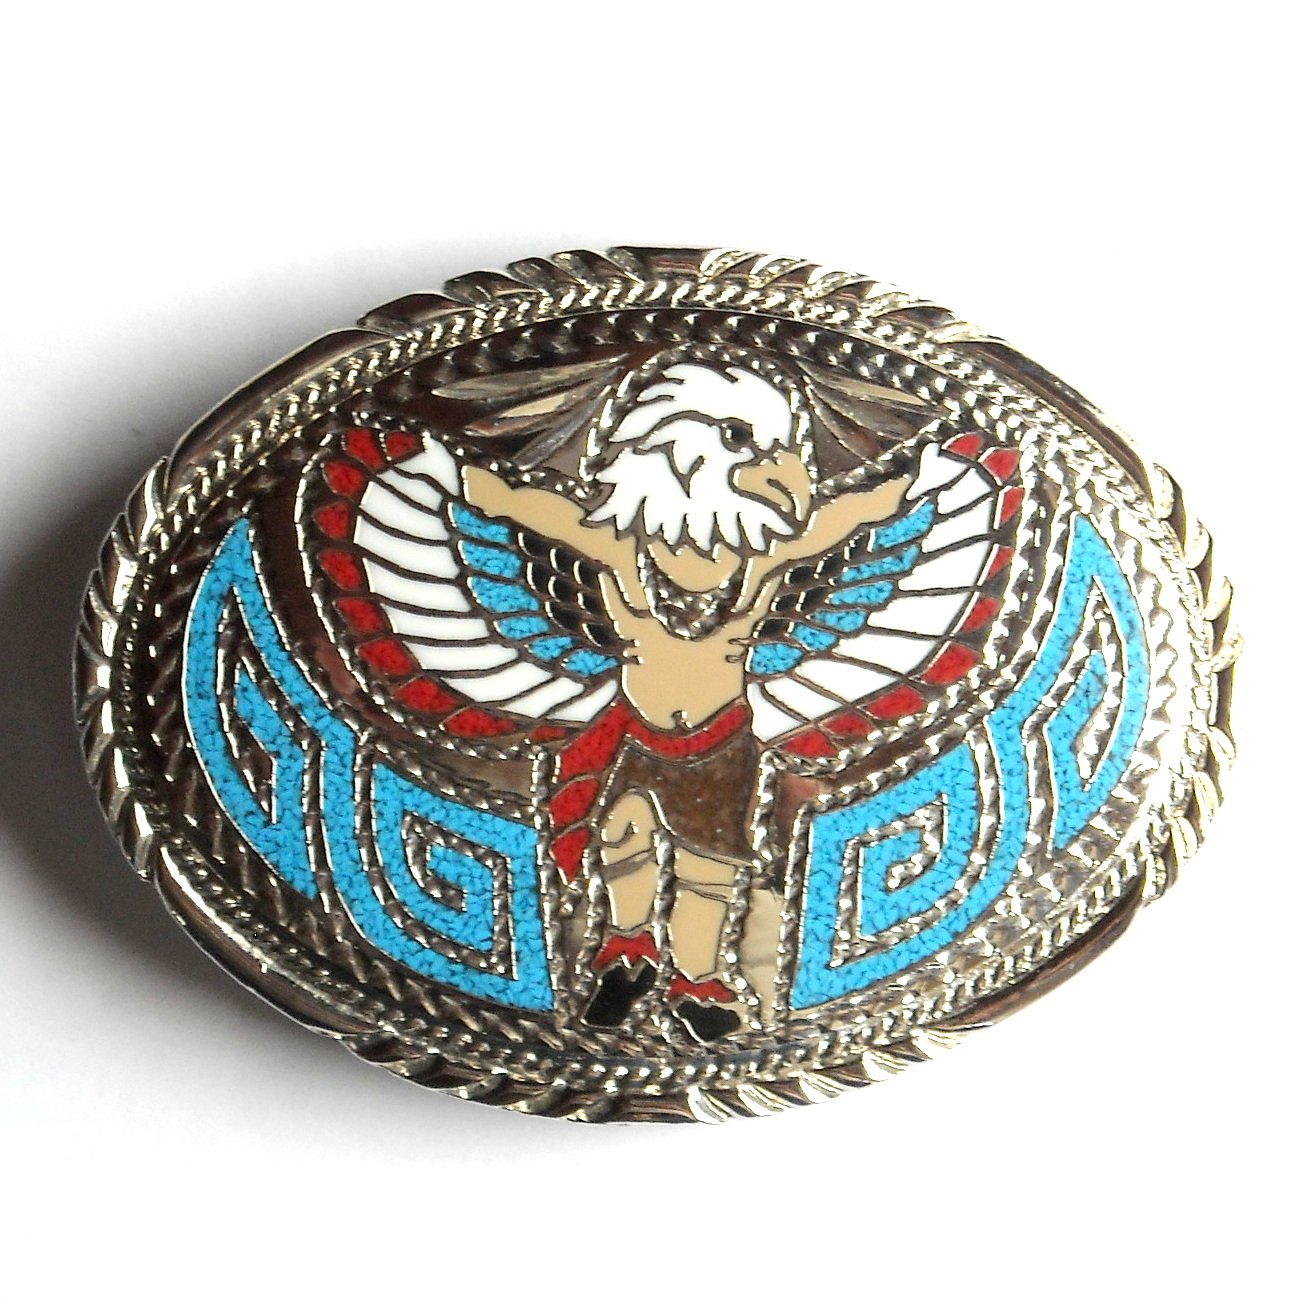 1988 STUNNING SSI HIGHLY INLAID HANDCRAFTED AMERICAN EAGLE LARGE BELT BUCKLE .